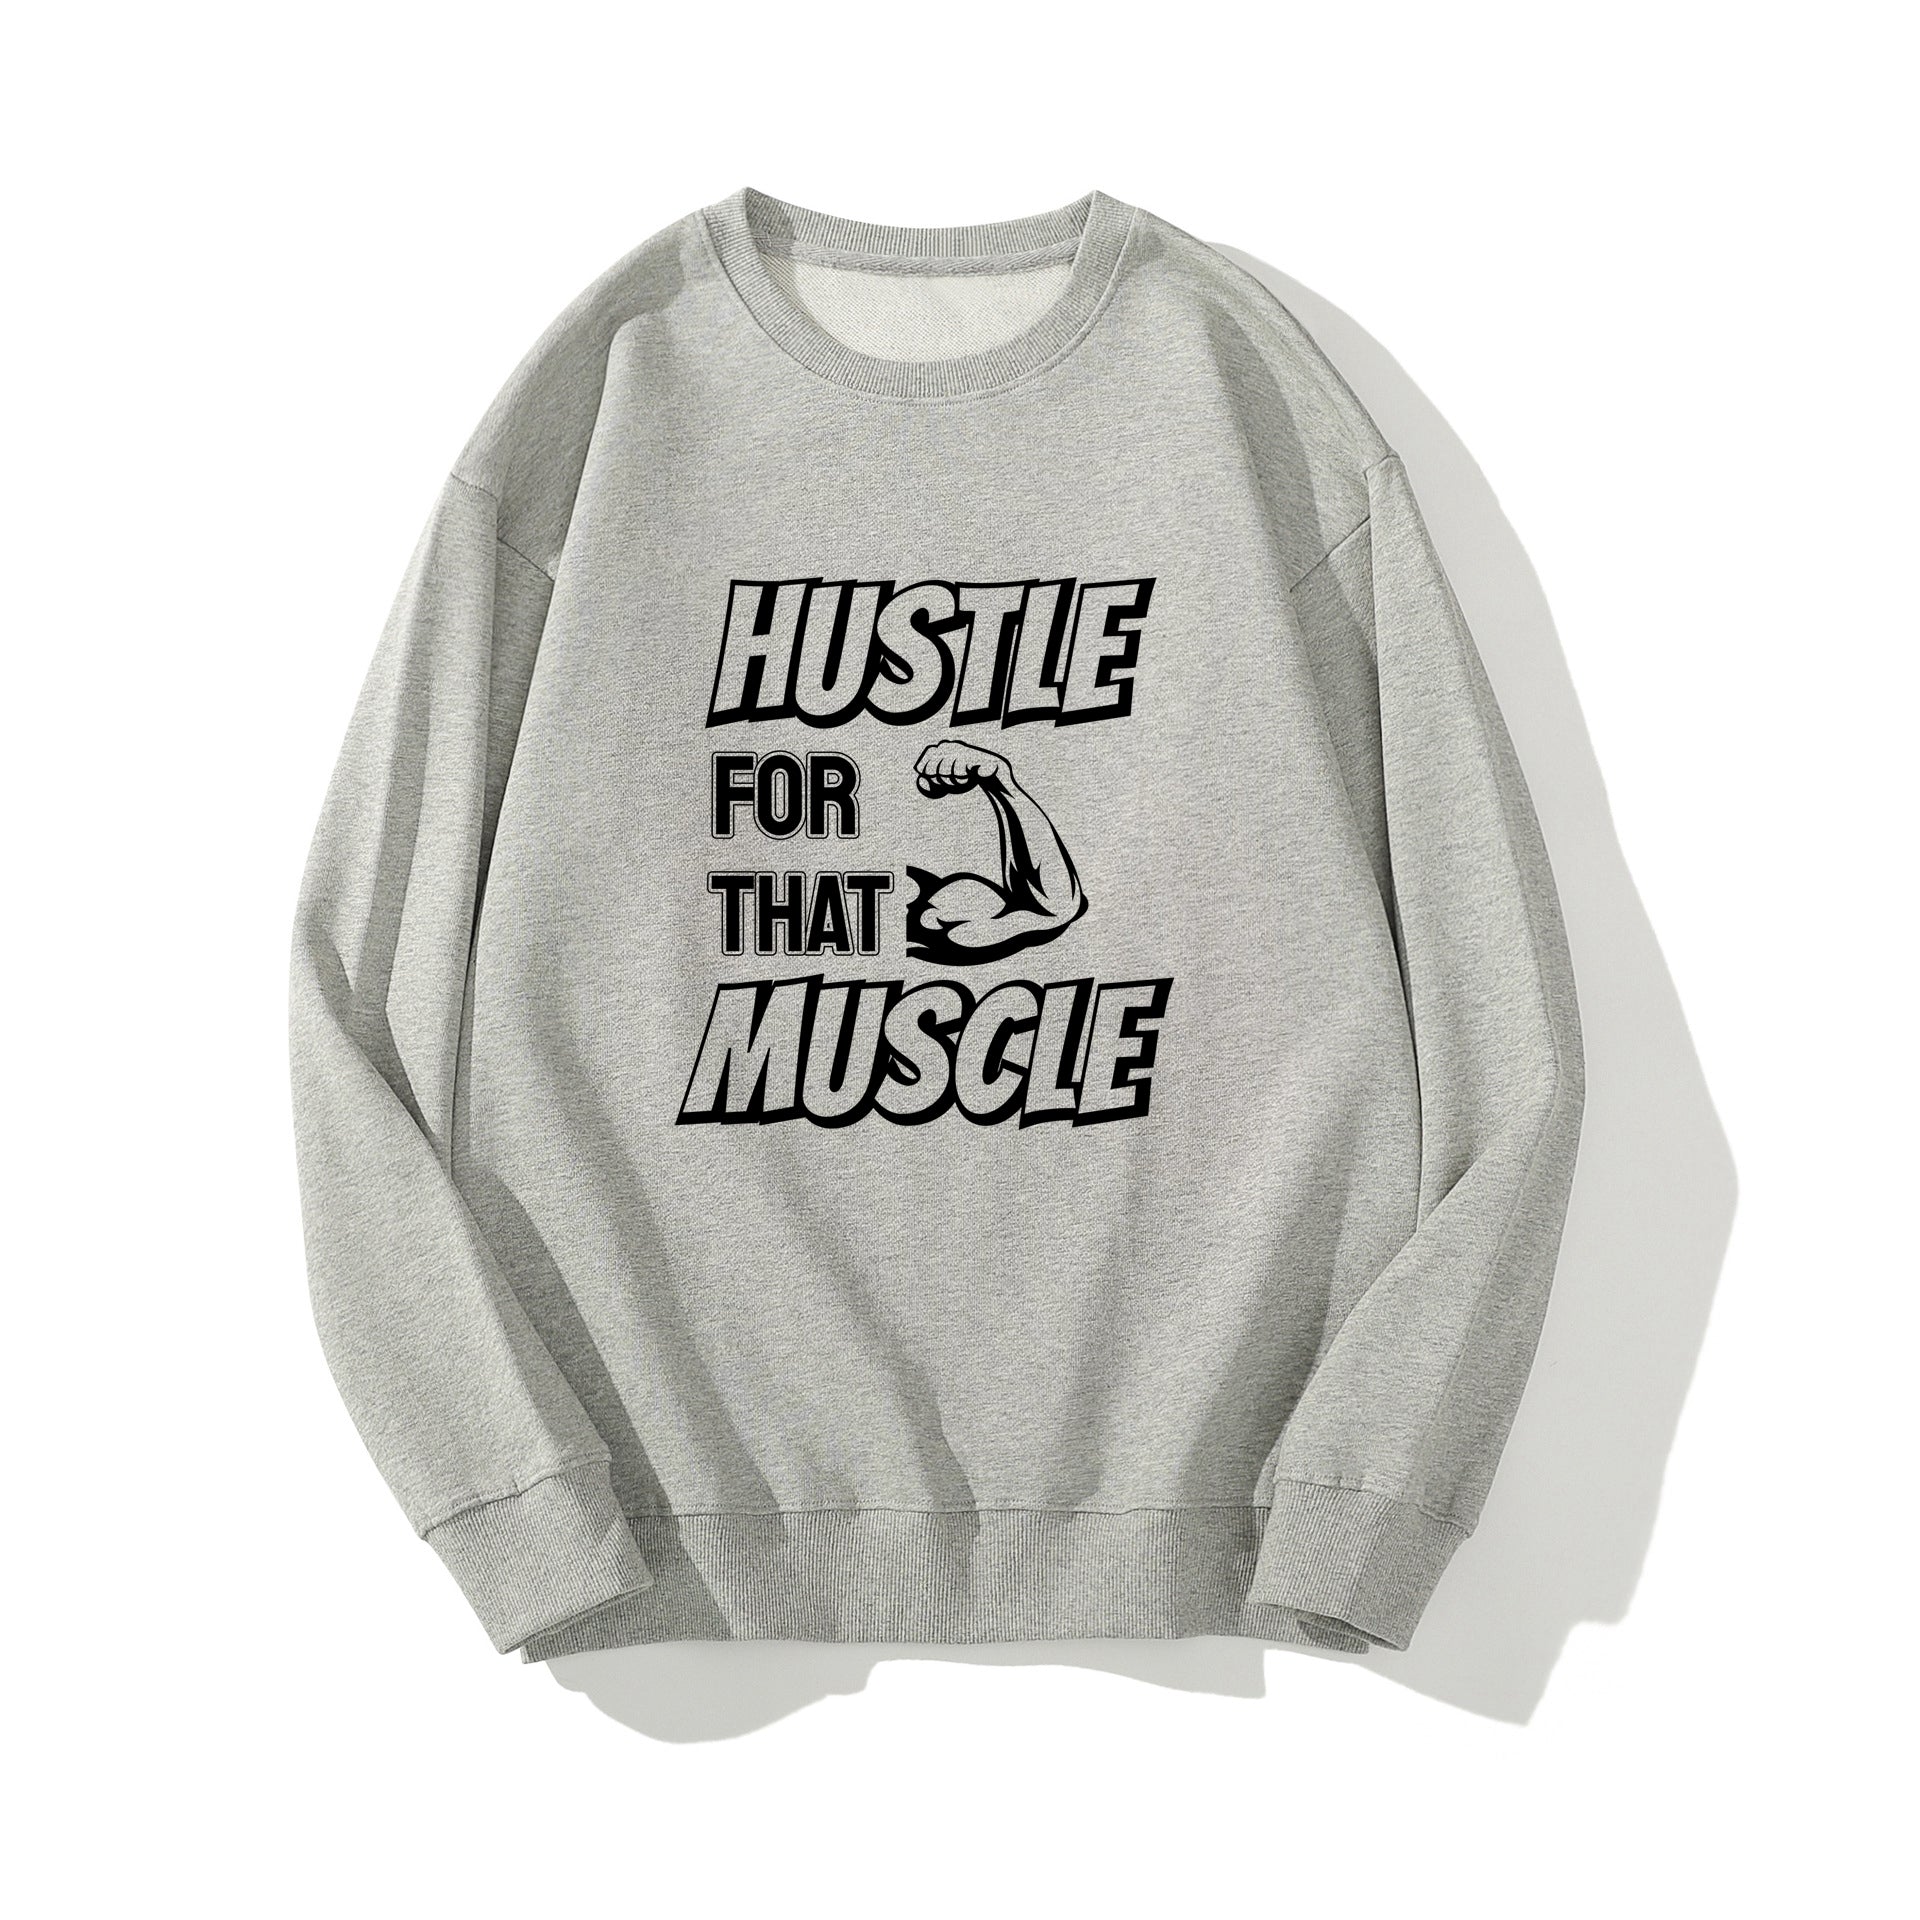 Men Workout Crewneck Sweatshirt Hustle for That Muscle Graphic Printed Sweater